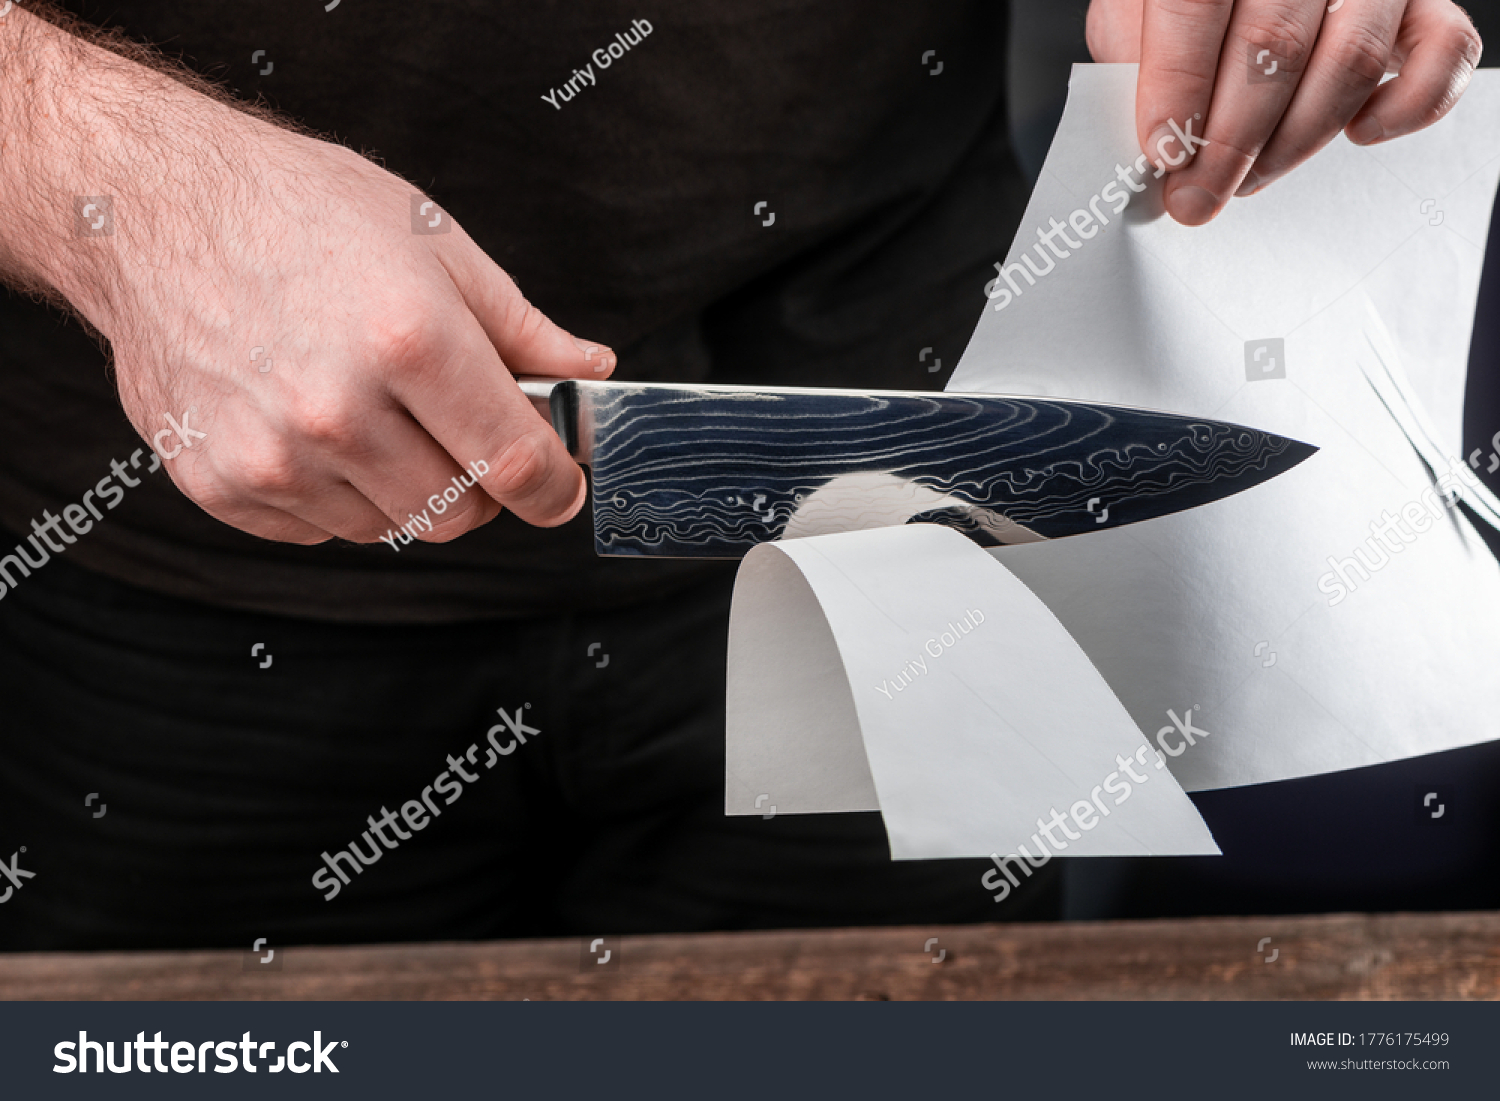 Man testing sharpness of knife by cutting a thin sheet of paper. Japanese Gyuto knife with Damascus steel blade. #1776175499